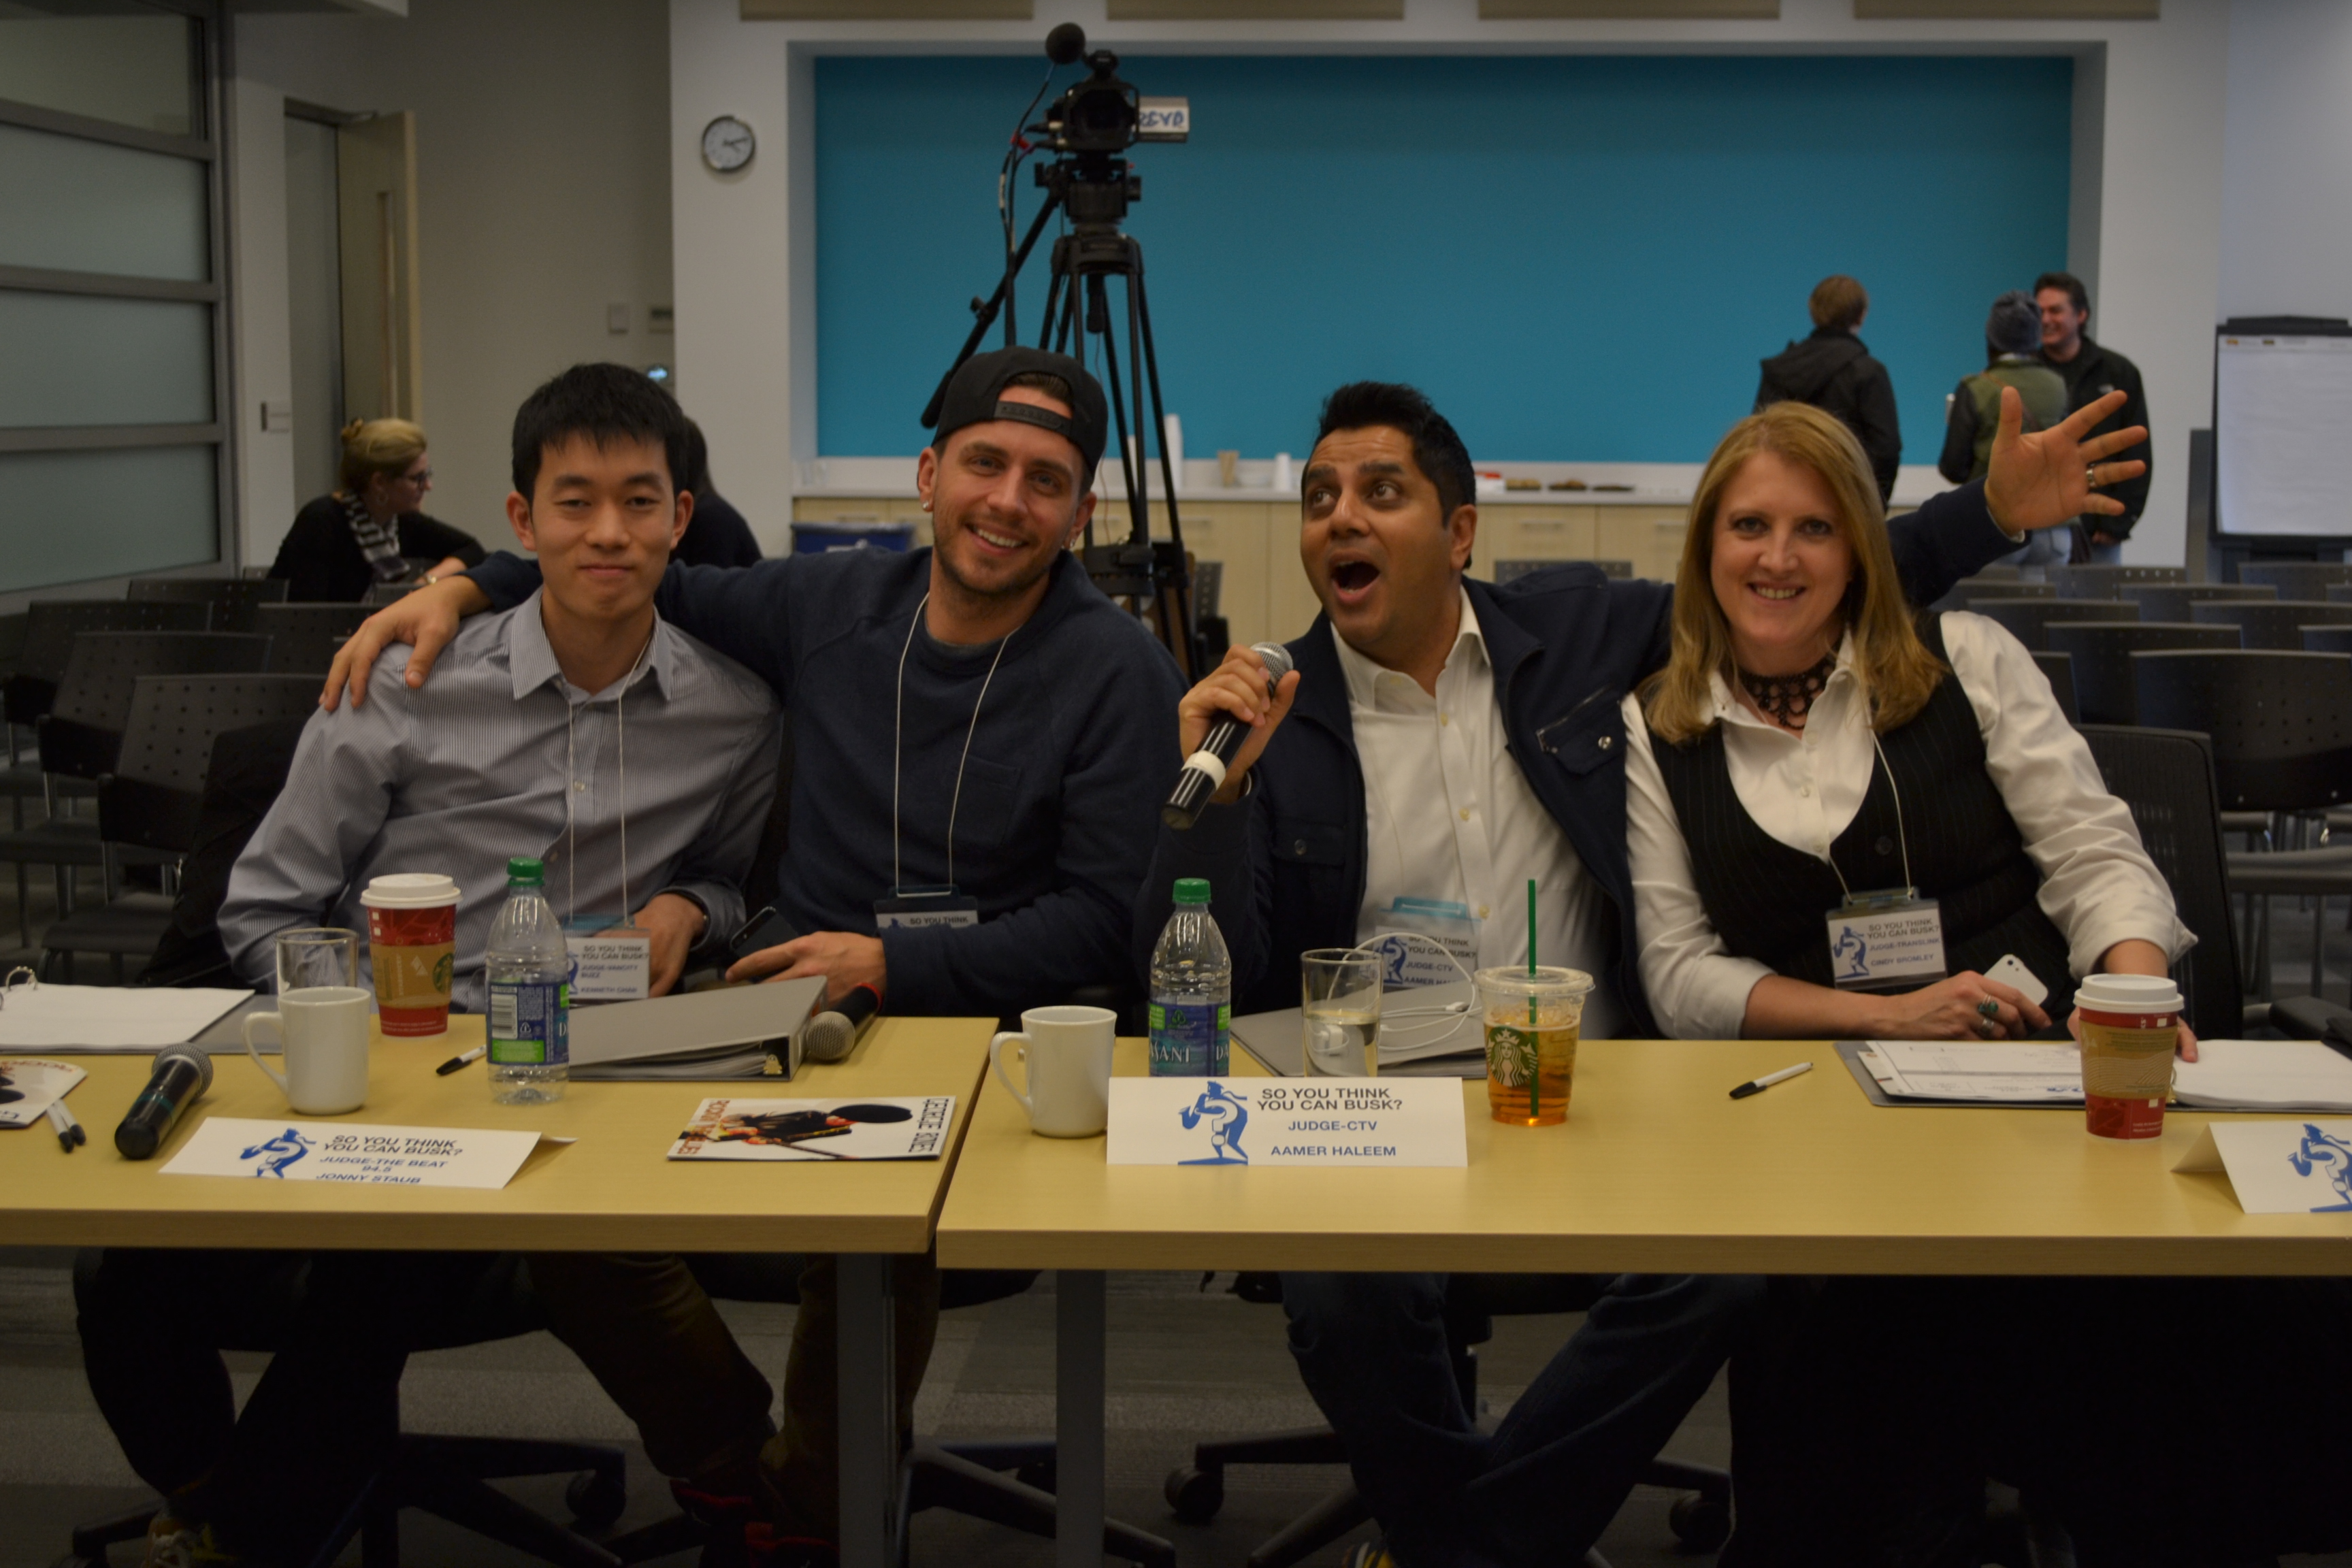 Thank you to our judges: Kenneth, Jonny, Aamer, and Cindy!